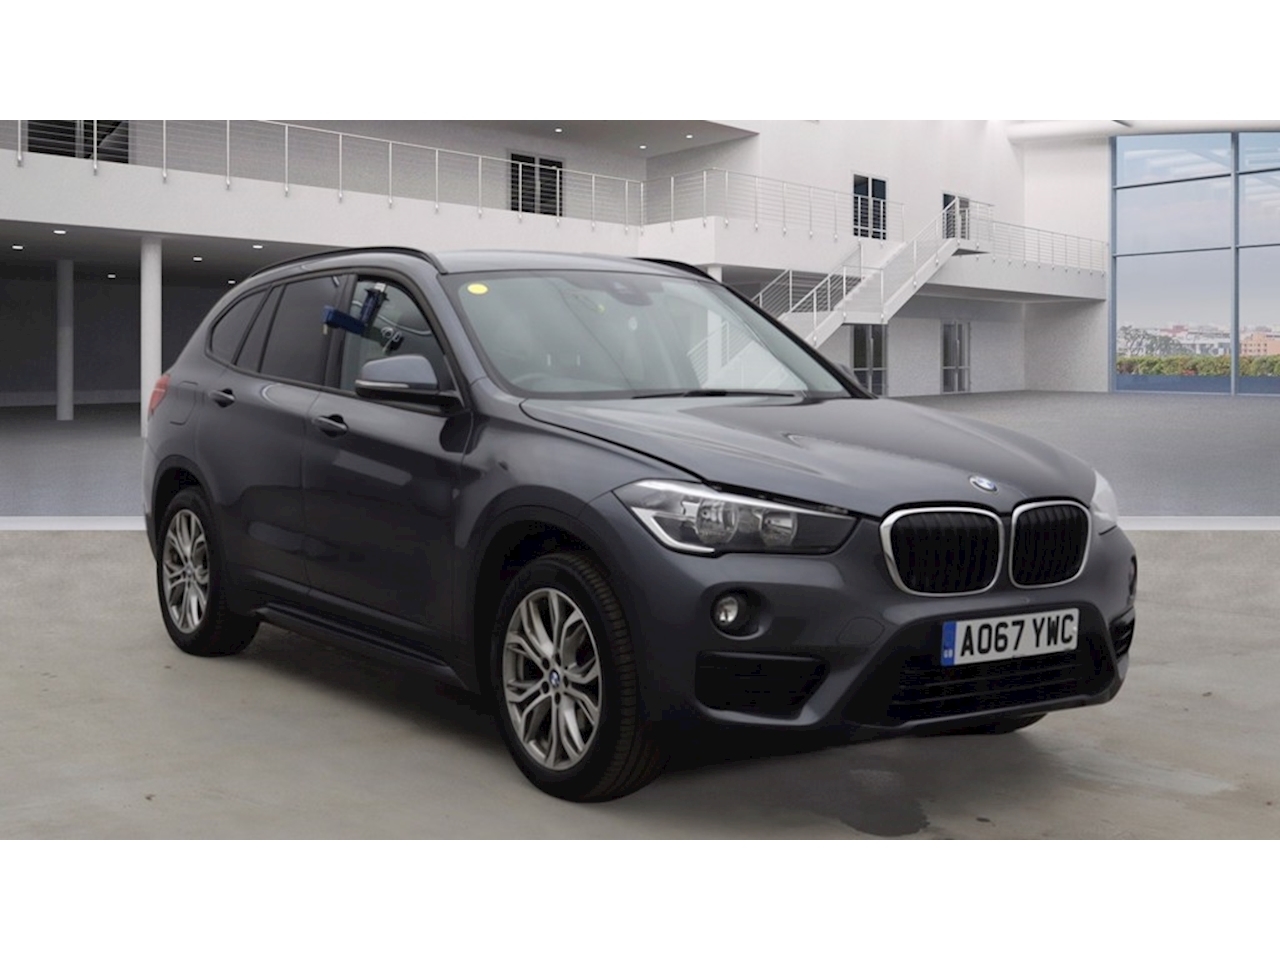 2.0 18d Sport SUV 5dr Diesel sDrive Euro 6 (s/s) (150 ps)